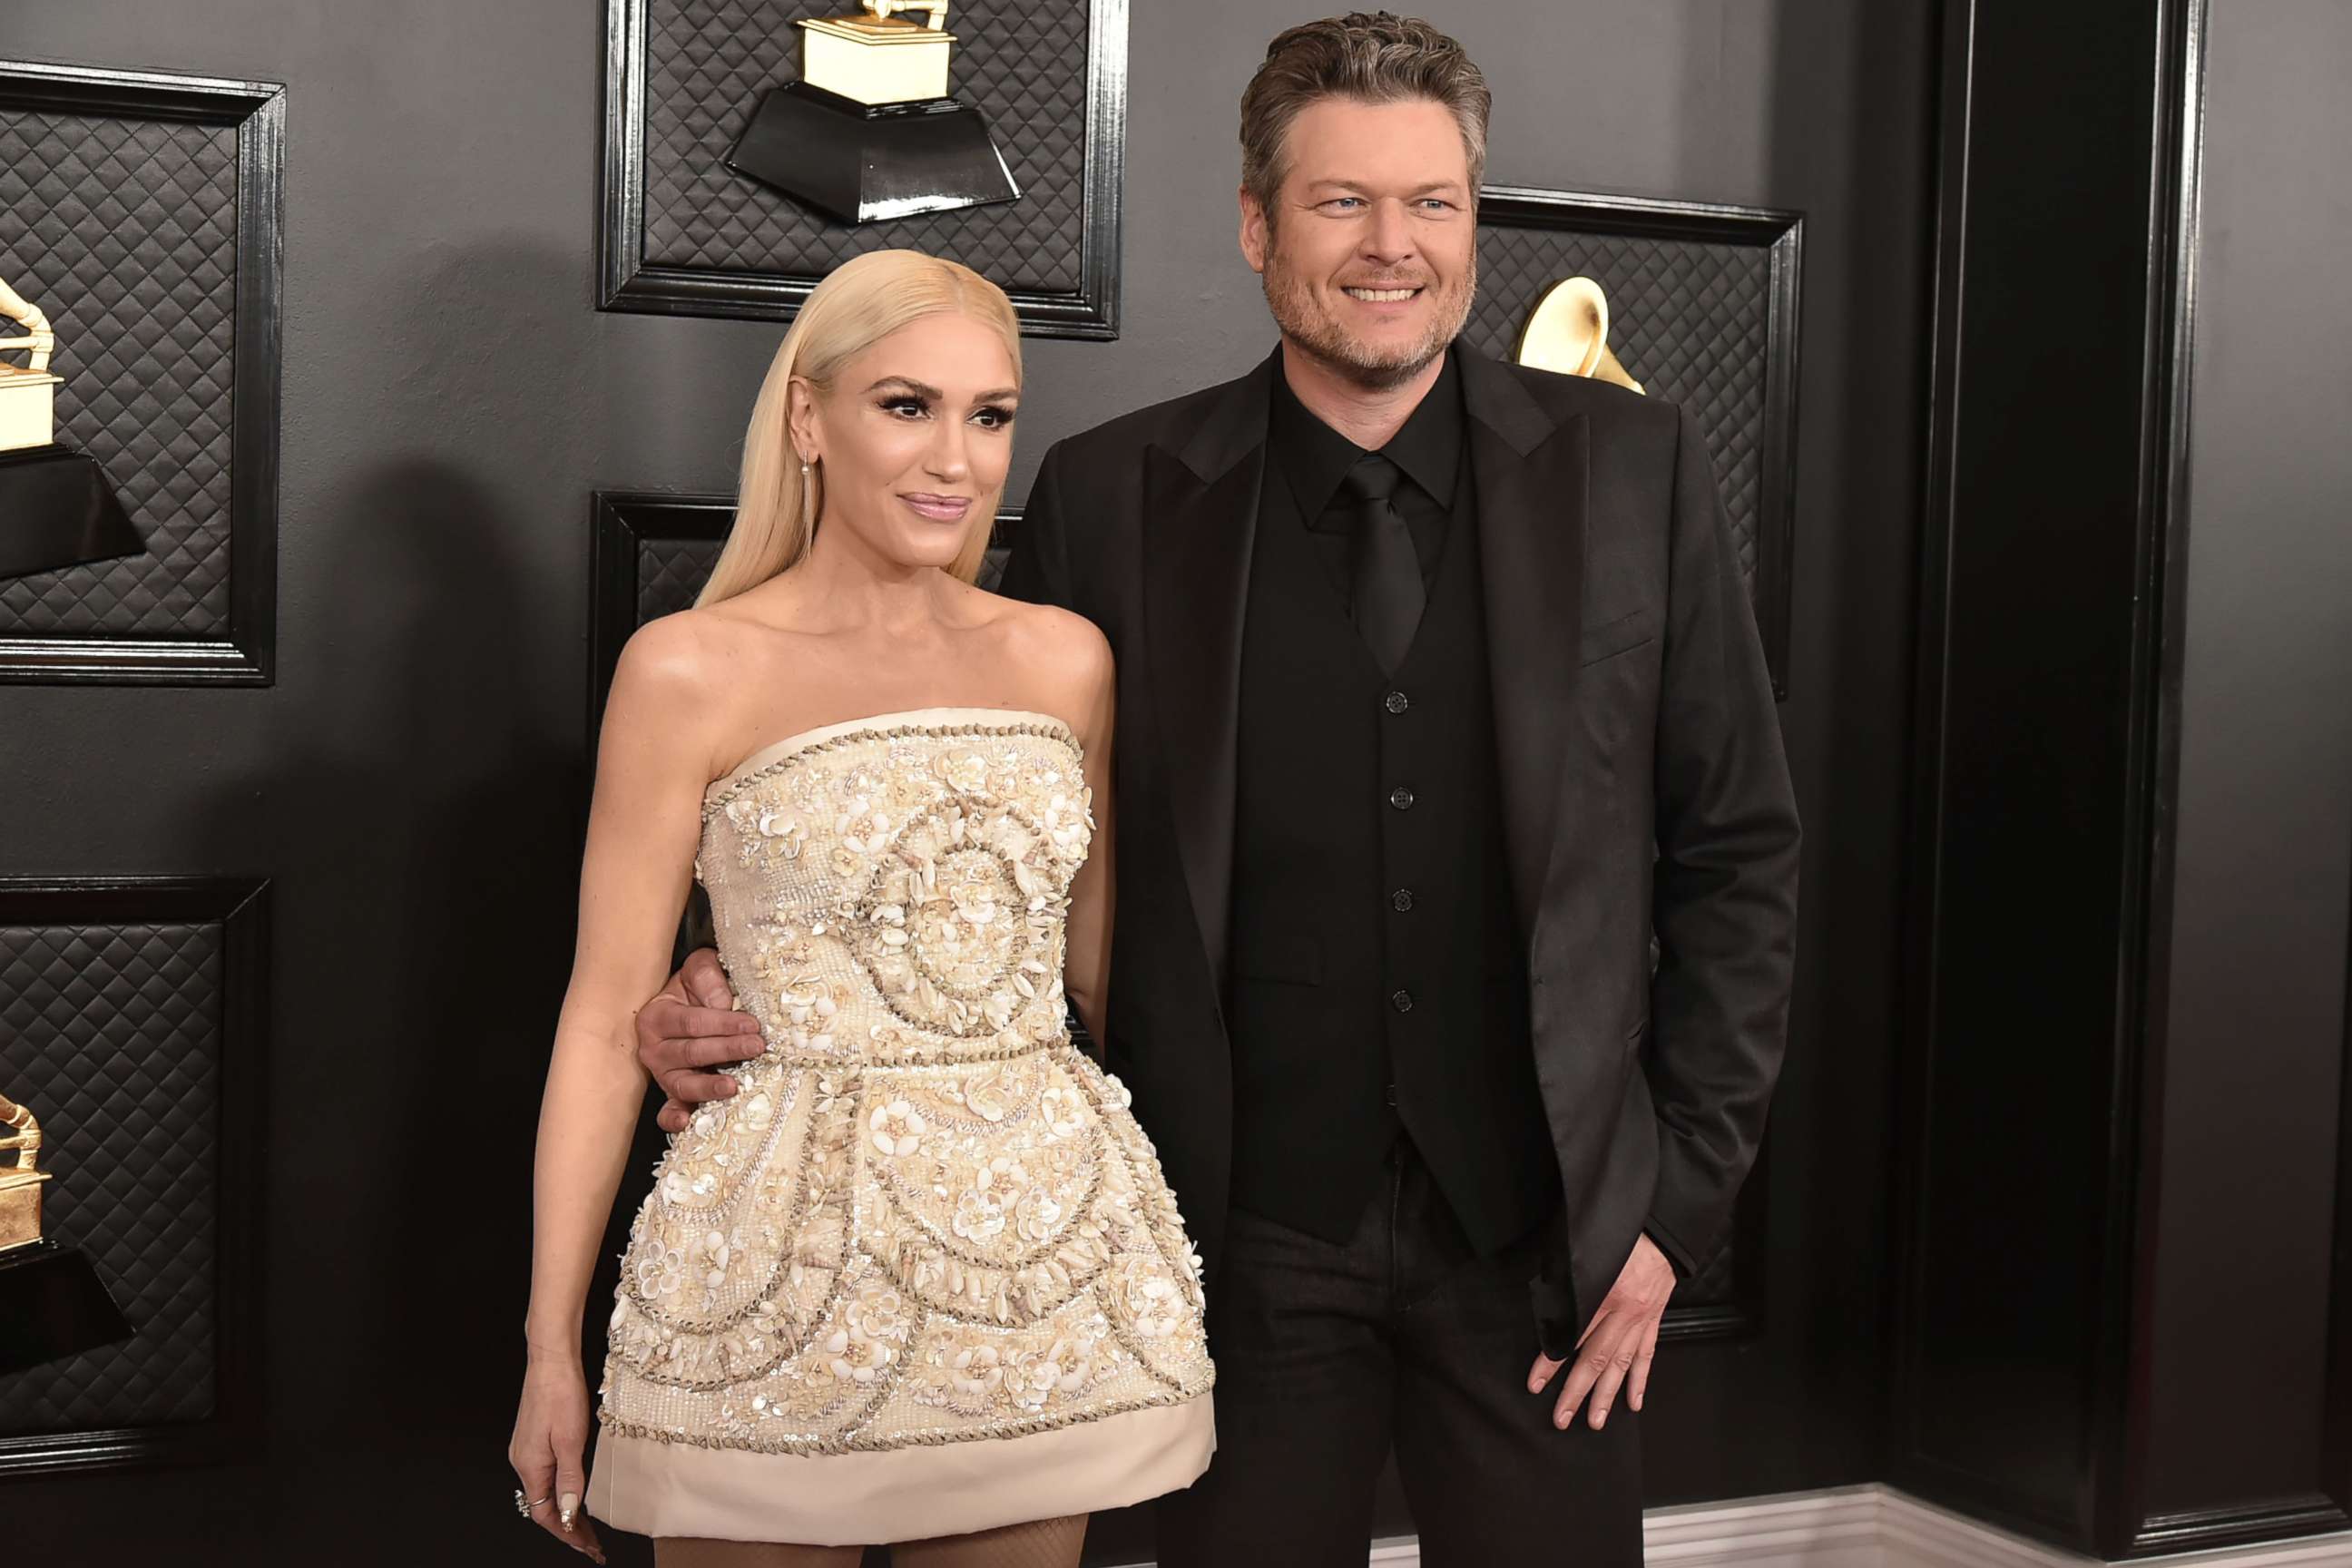 PHOTO: In this Jan. 26, 2020 file photo Gwen Stefani and Blake Shelton attend the 62nd Annual Grammy Awards at Staples Center in Los Angeles.